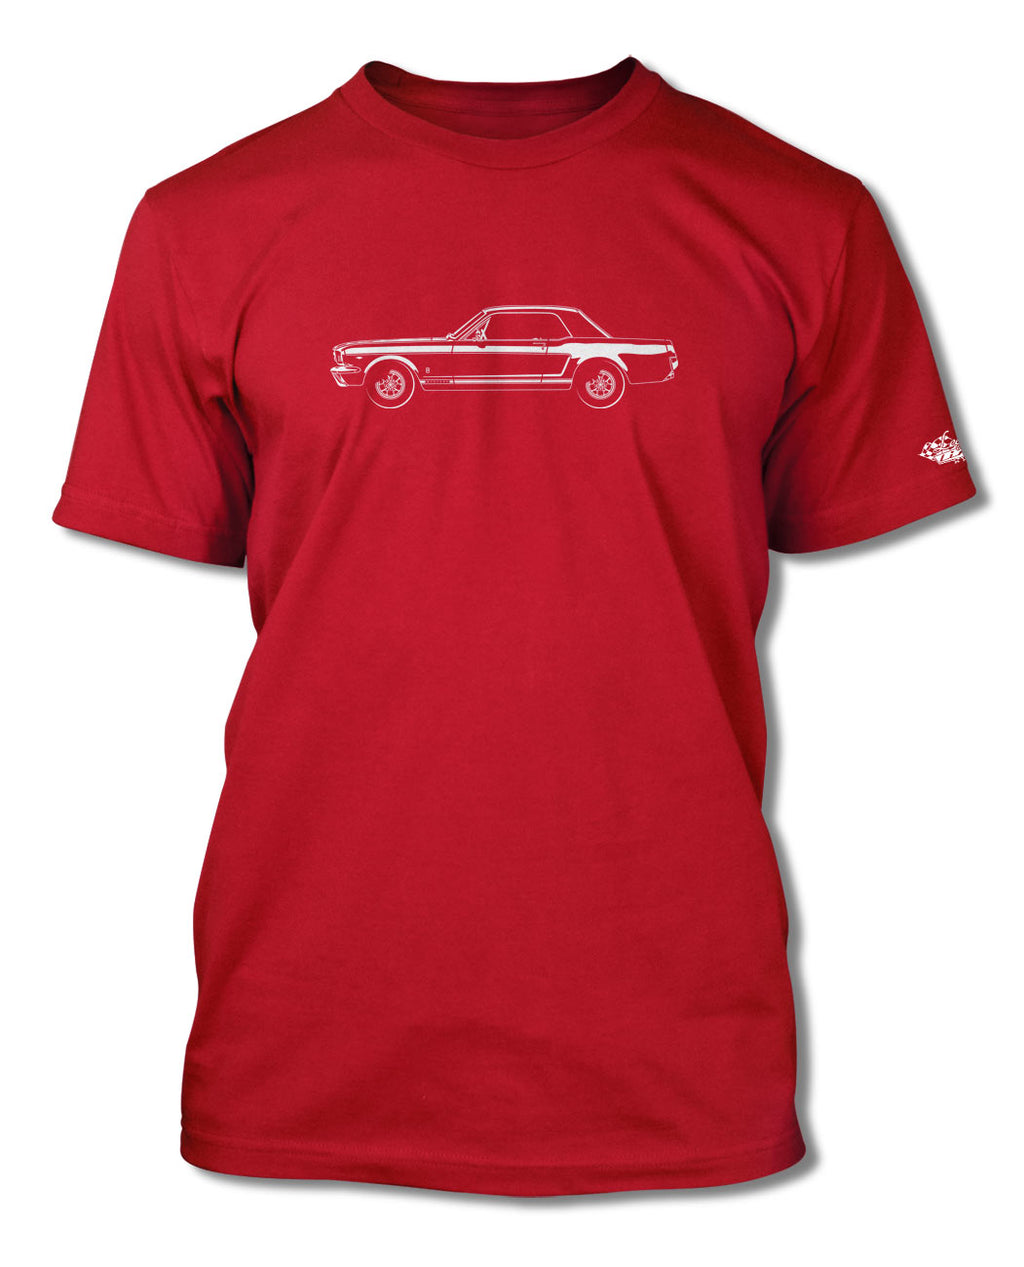 1966 Ford Mustang GT Coupe T-Shirt - Men - Side View